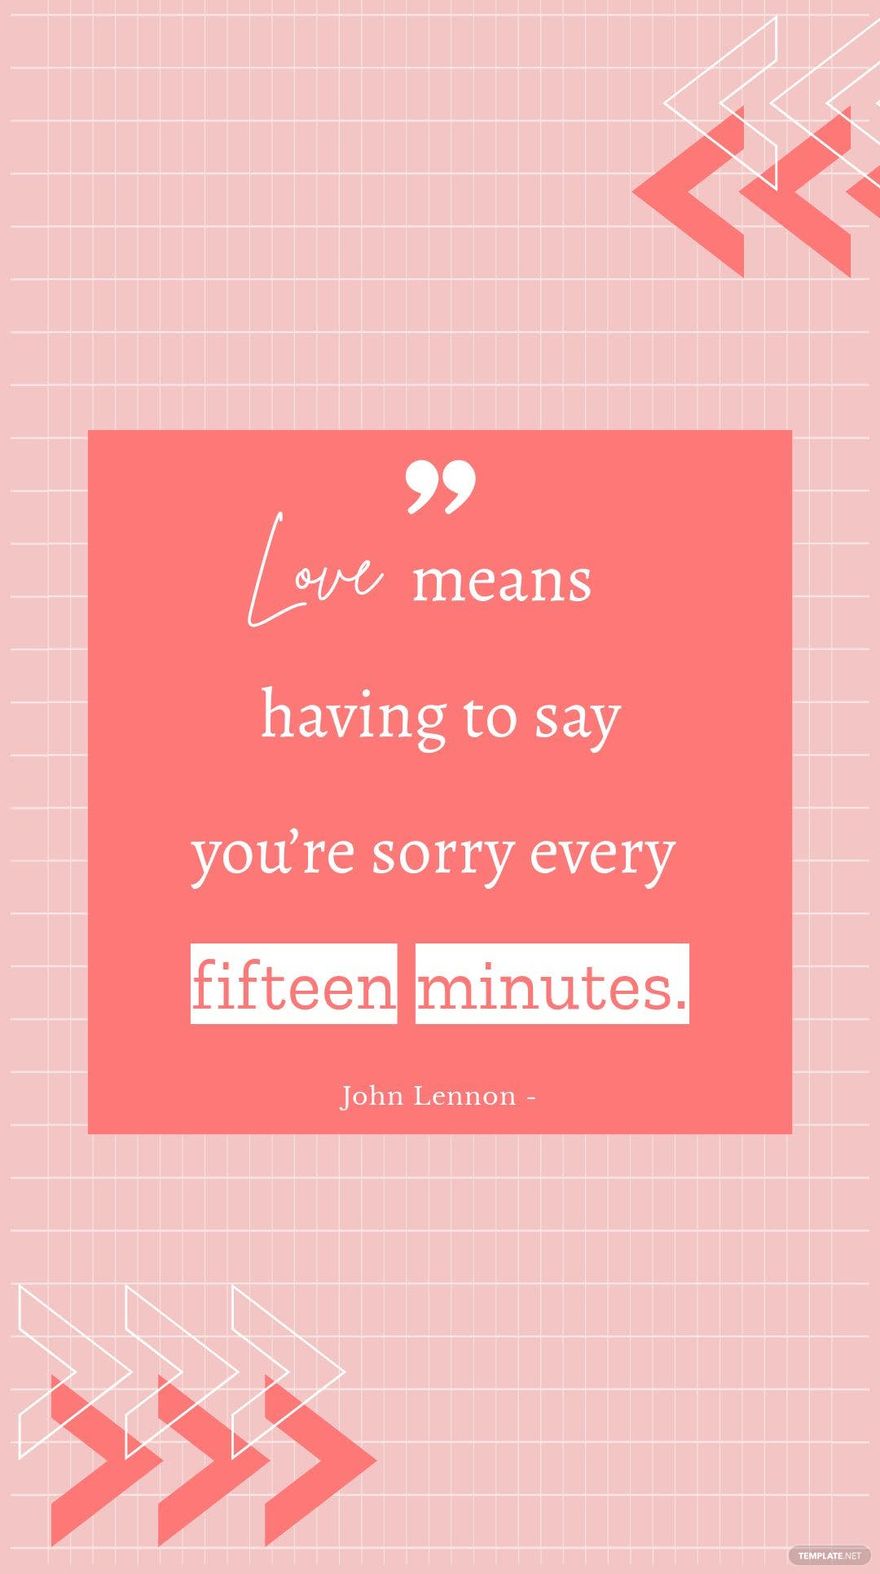 John Lennon - “Love means having to say you’re sorry every fifteen minutes.”